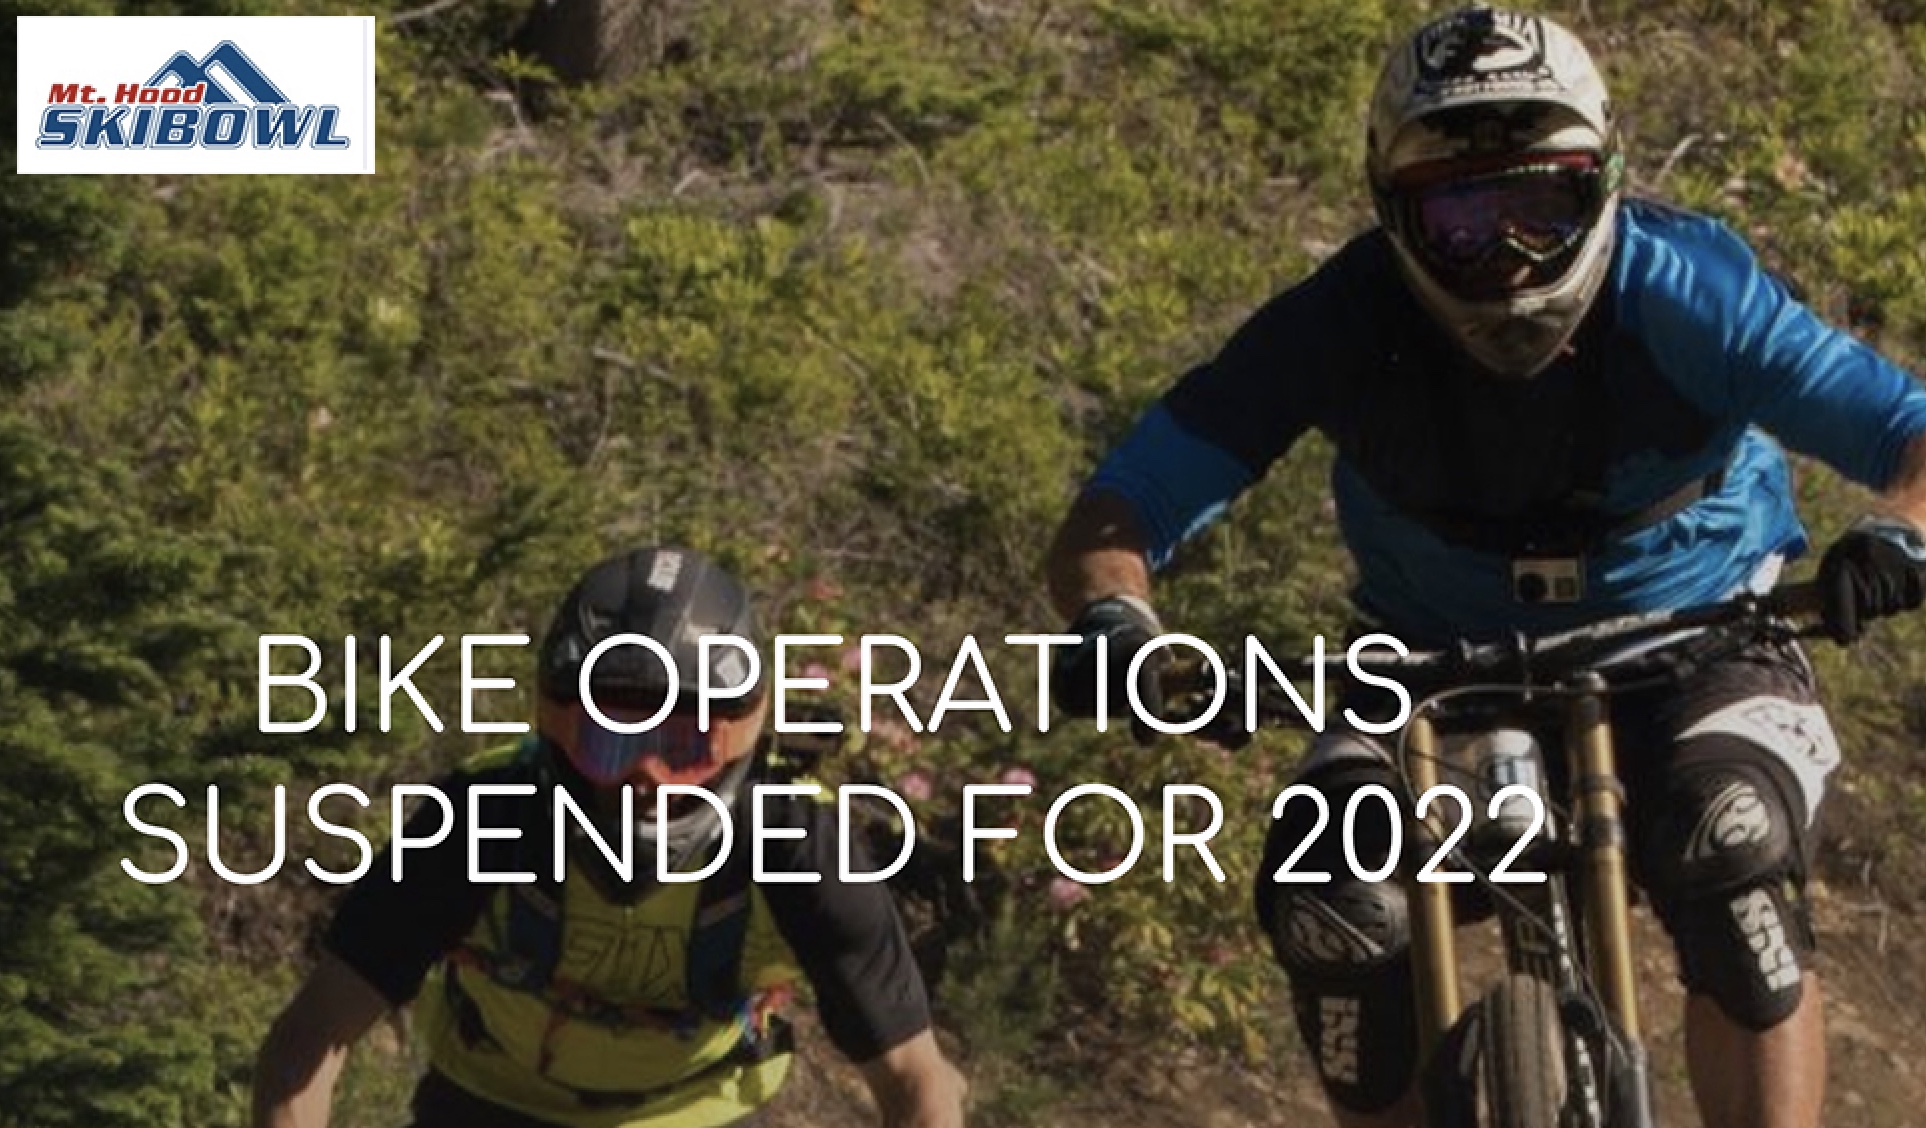 Screen grab from Mt. Hood Skibowl site showing 2 MTB riders in protective gear and the words "Bike Operations Suspended for 2022"